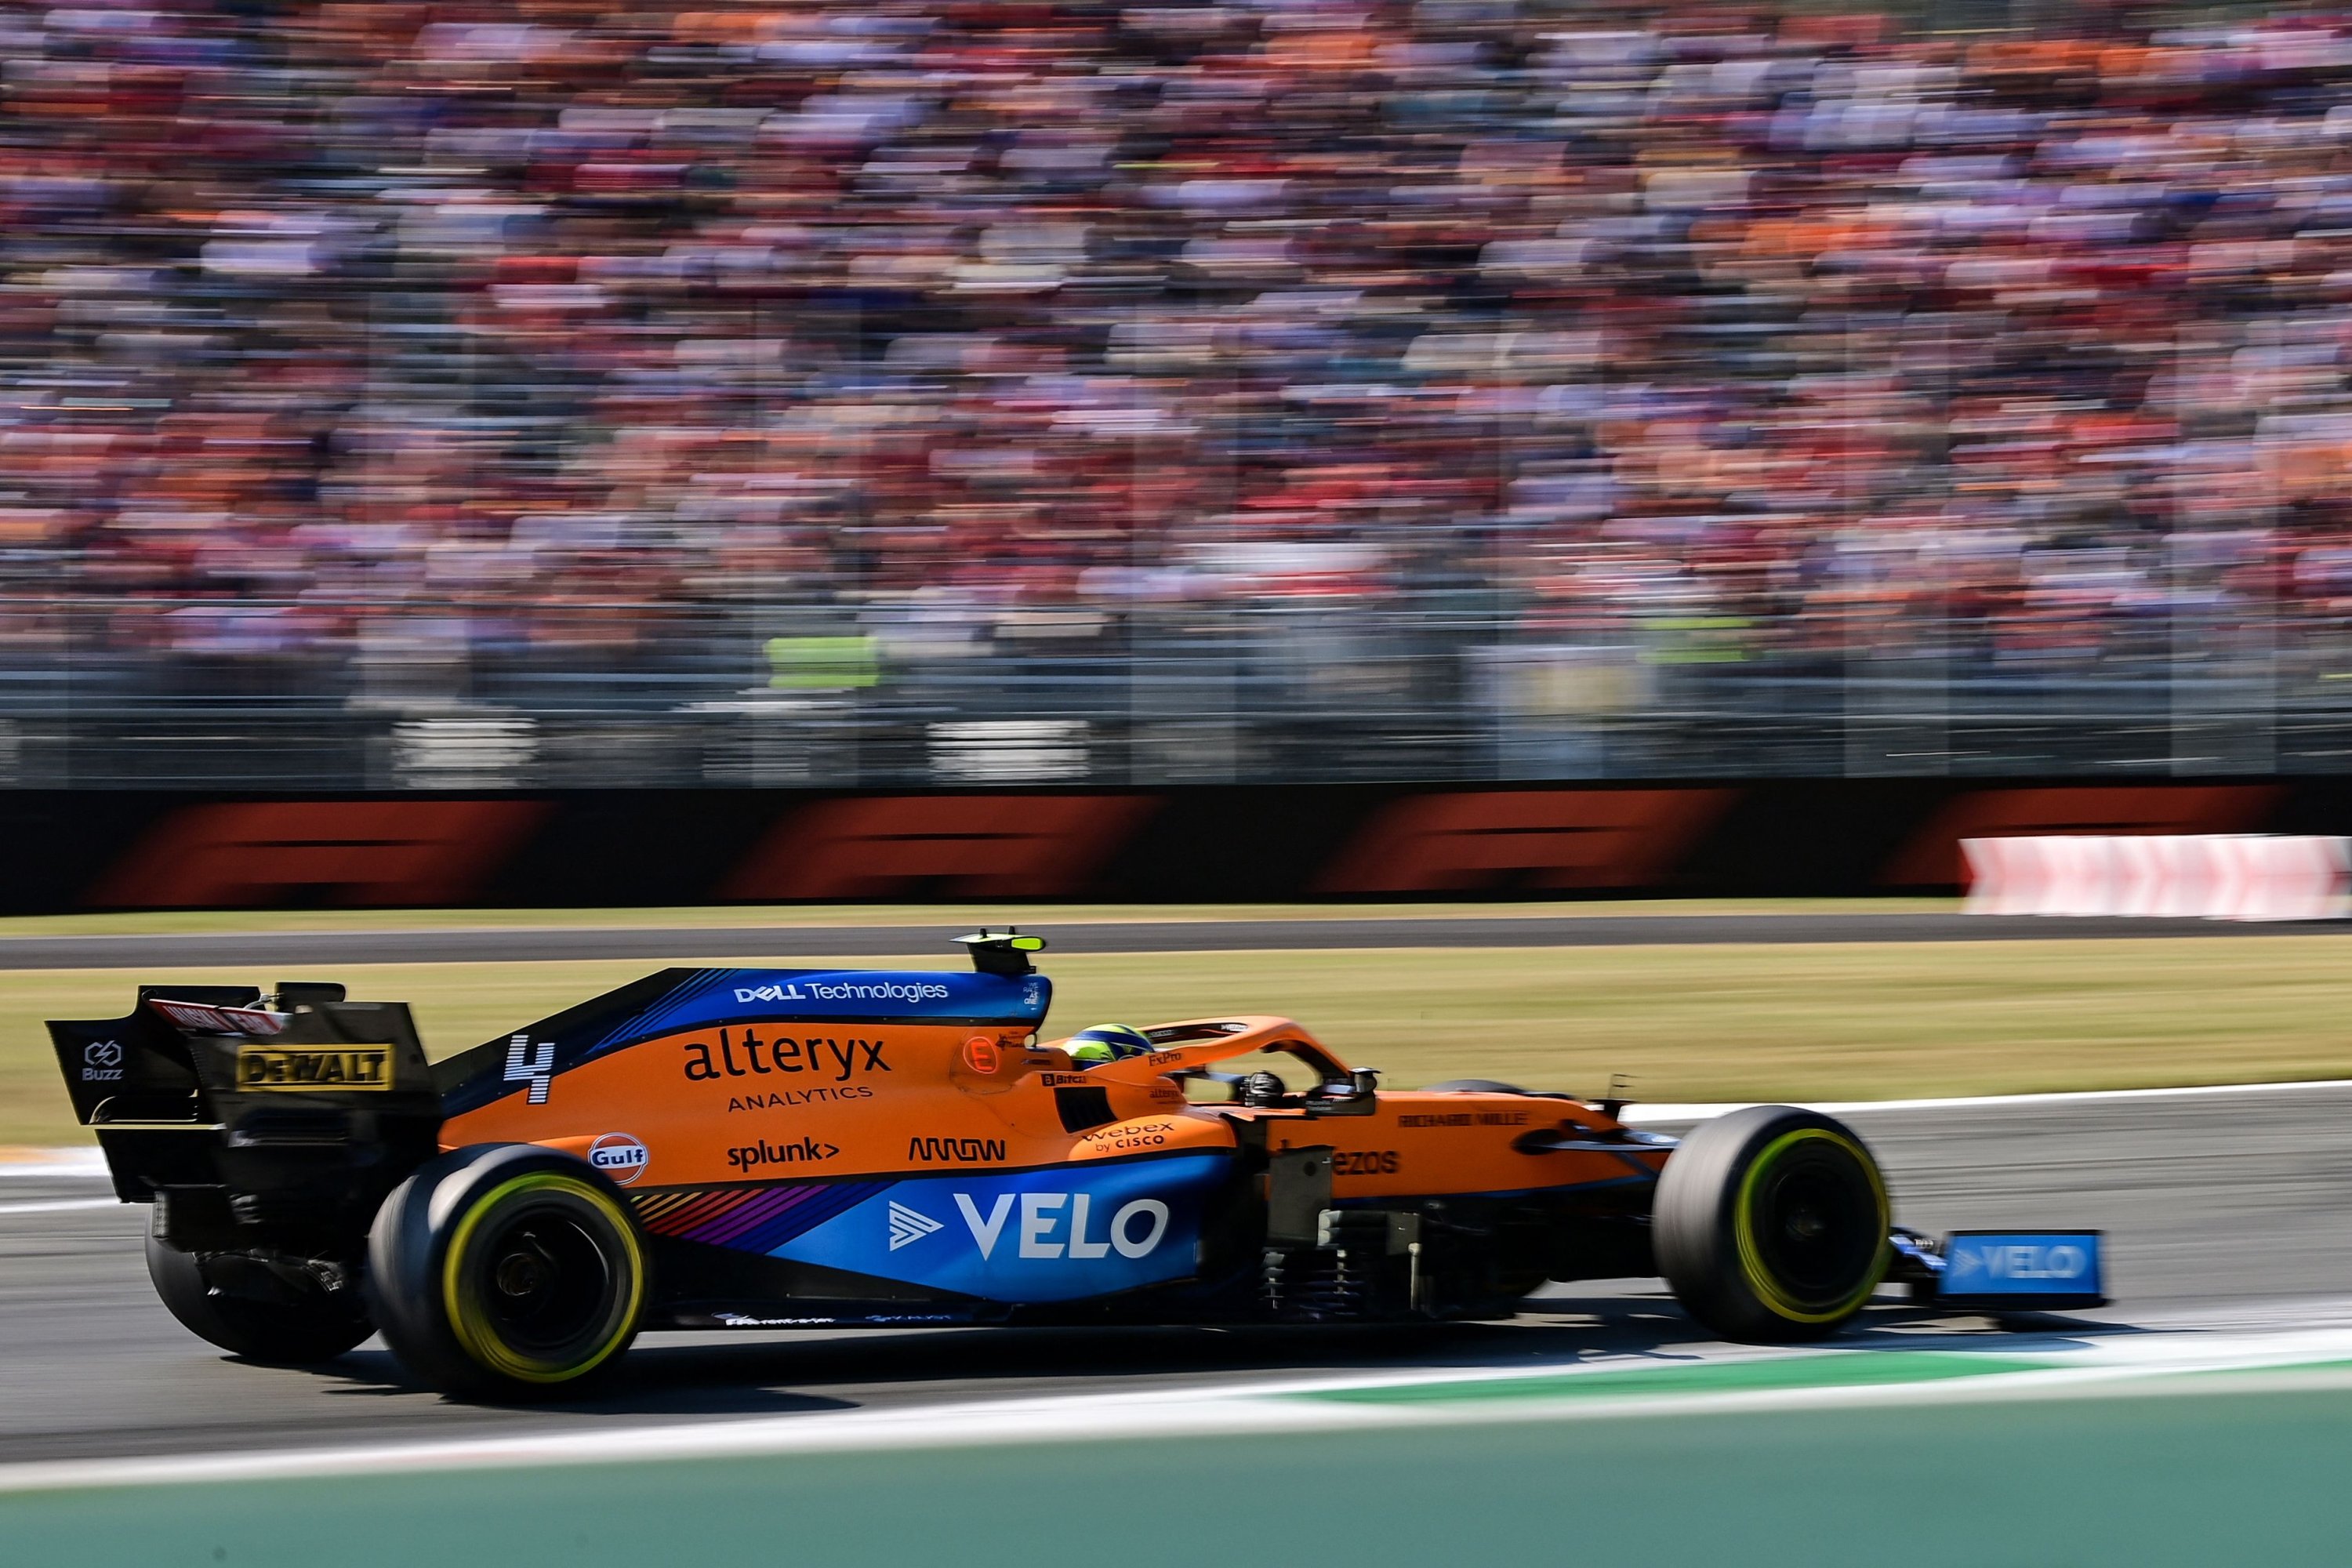 McLaren's British driver Lando Norris drives during the Italian Formula One Grand Prix at the Autodromo Nazionale circuit in Monza, Italy, Sept. 12, 2021. (AFP Photo)